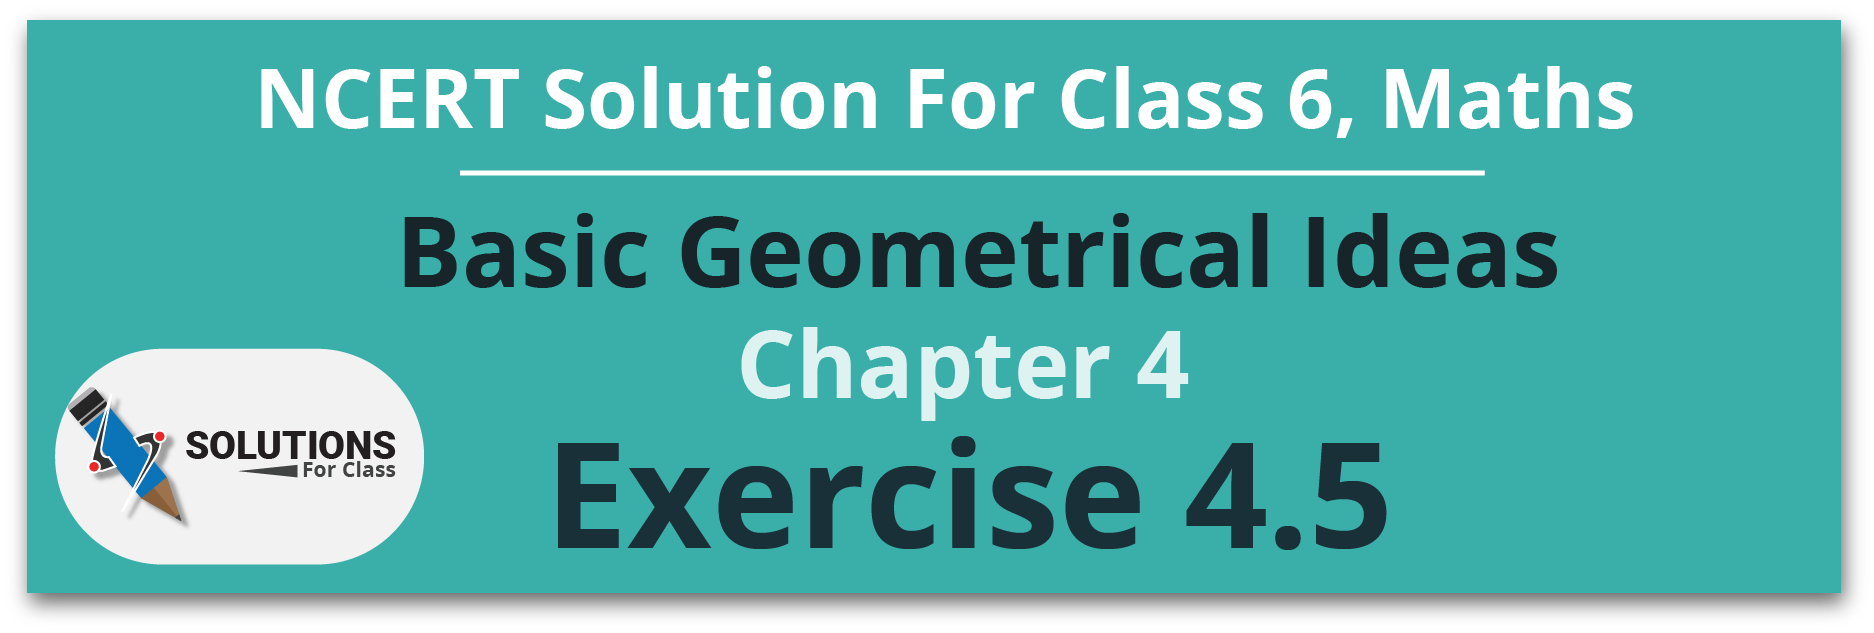 NCERT Solutions For Class 6 Maths, Chapter 4, Basic Geometrical Ideas, Exercise 4.5